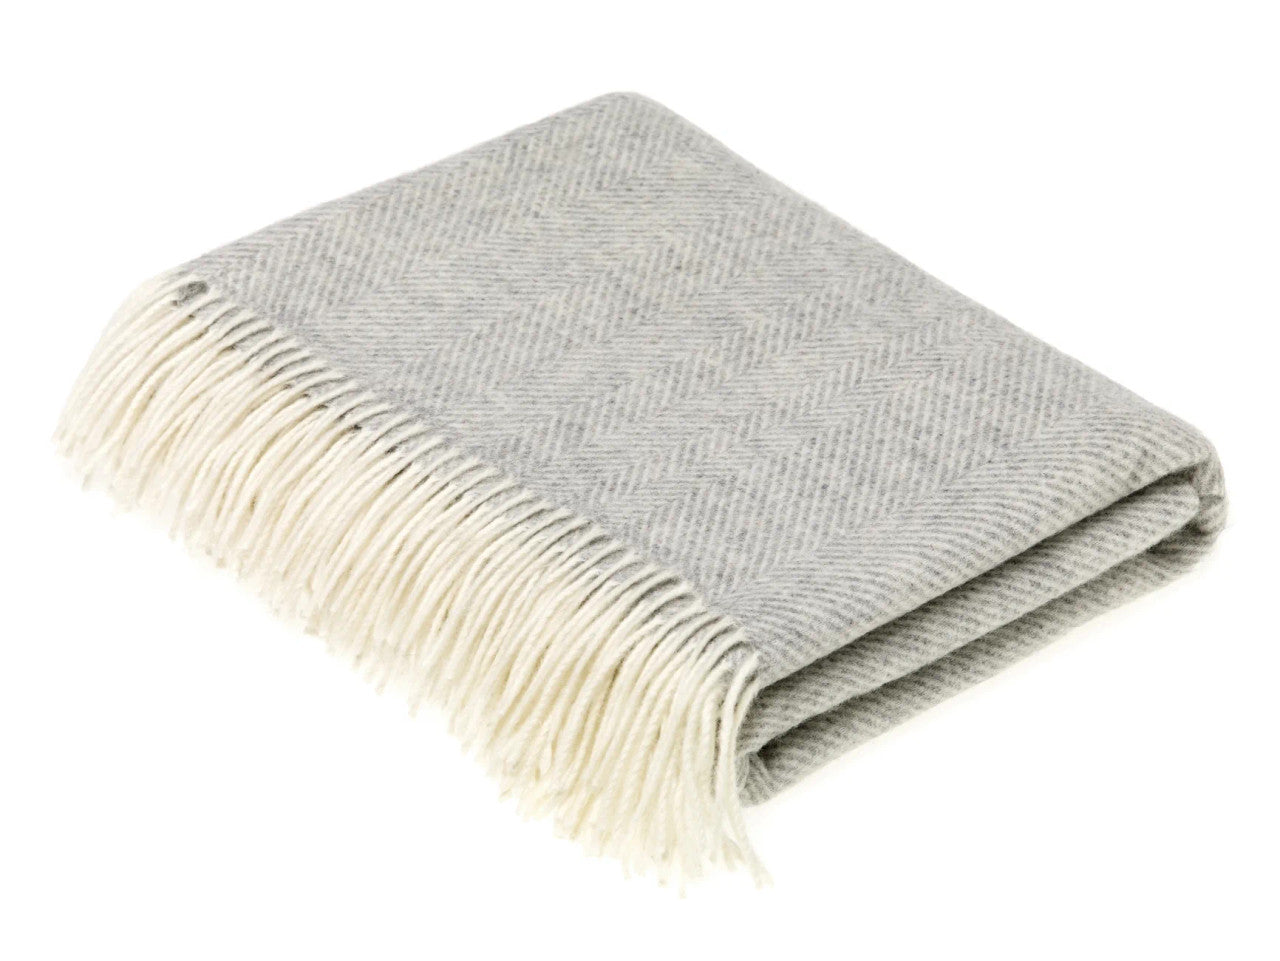 Classic Collection Herringbone Marino Lambswool Throw Blanket by Bronte Moon. Made in England.